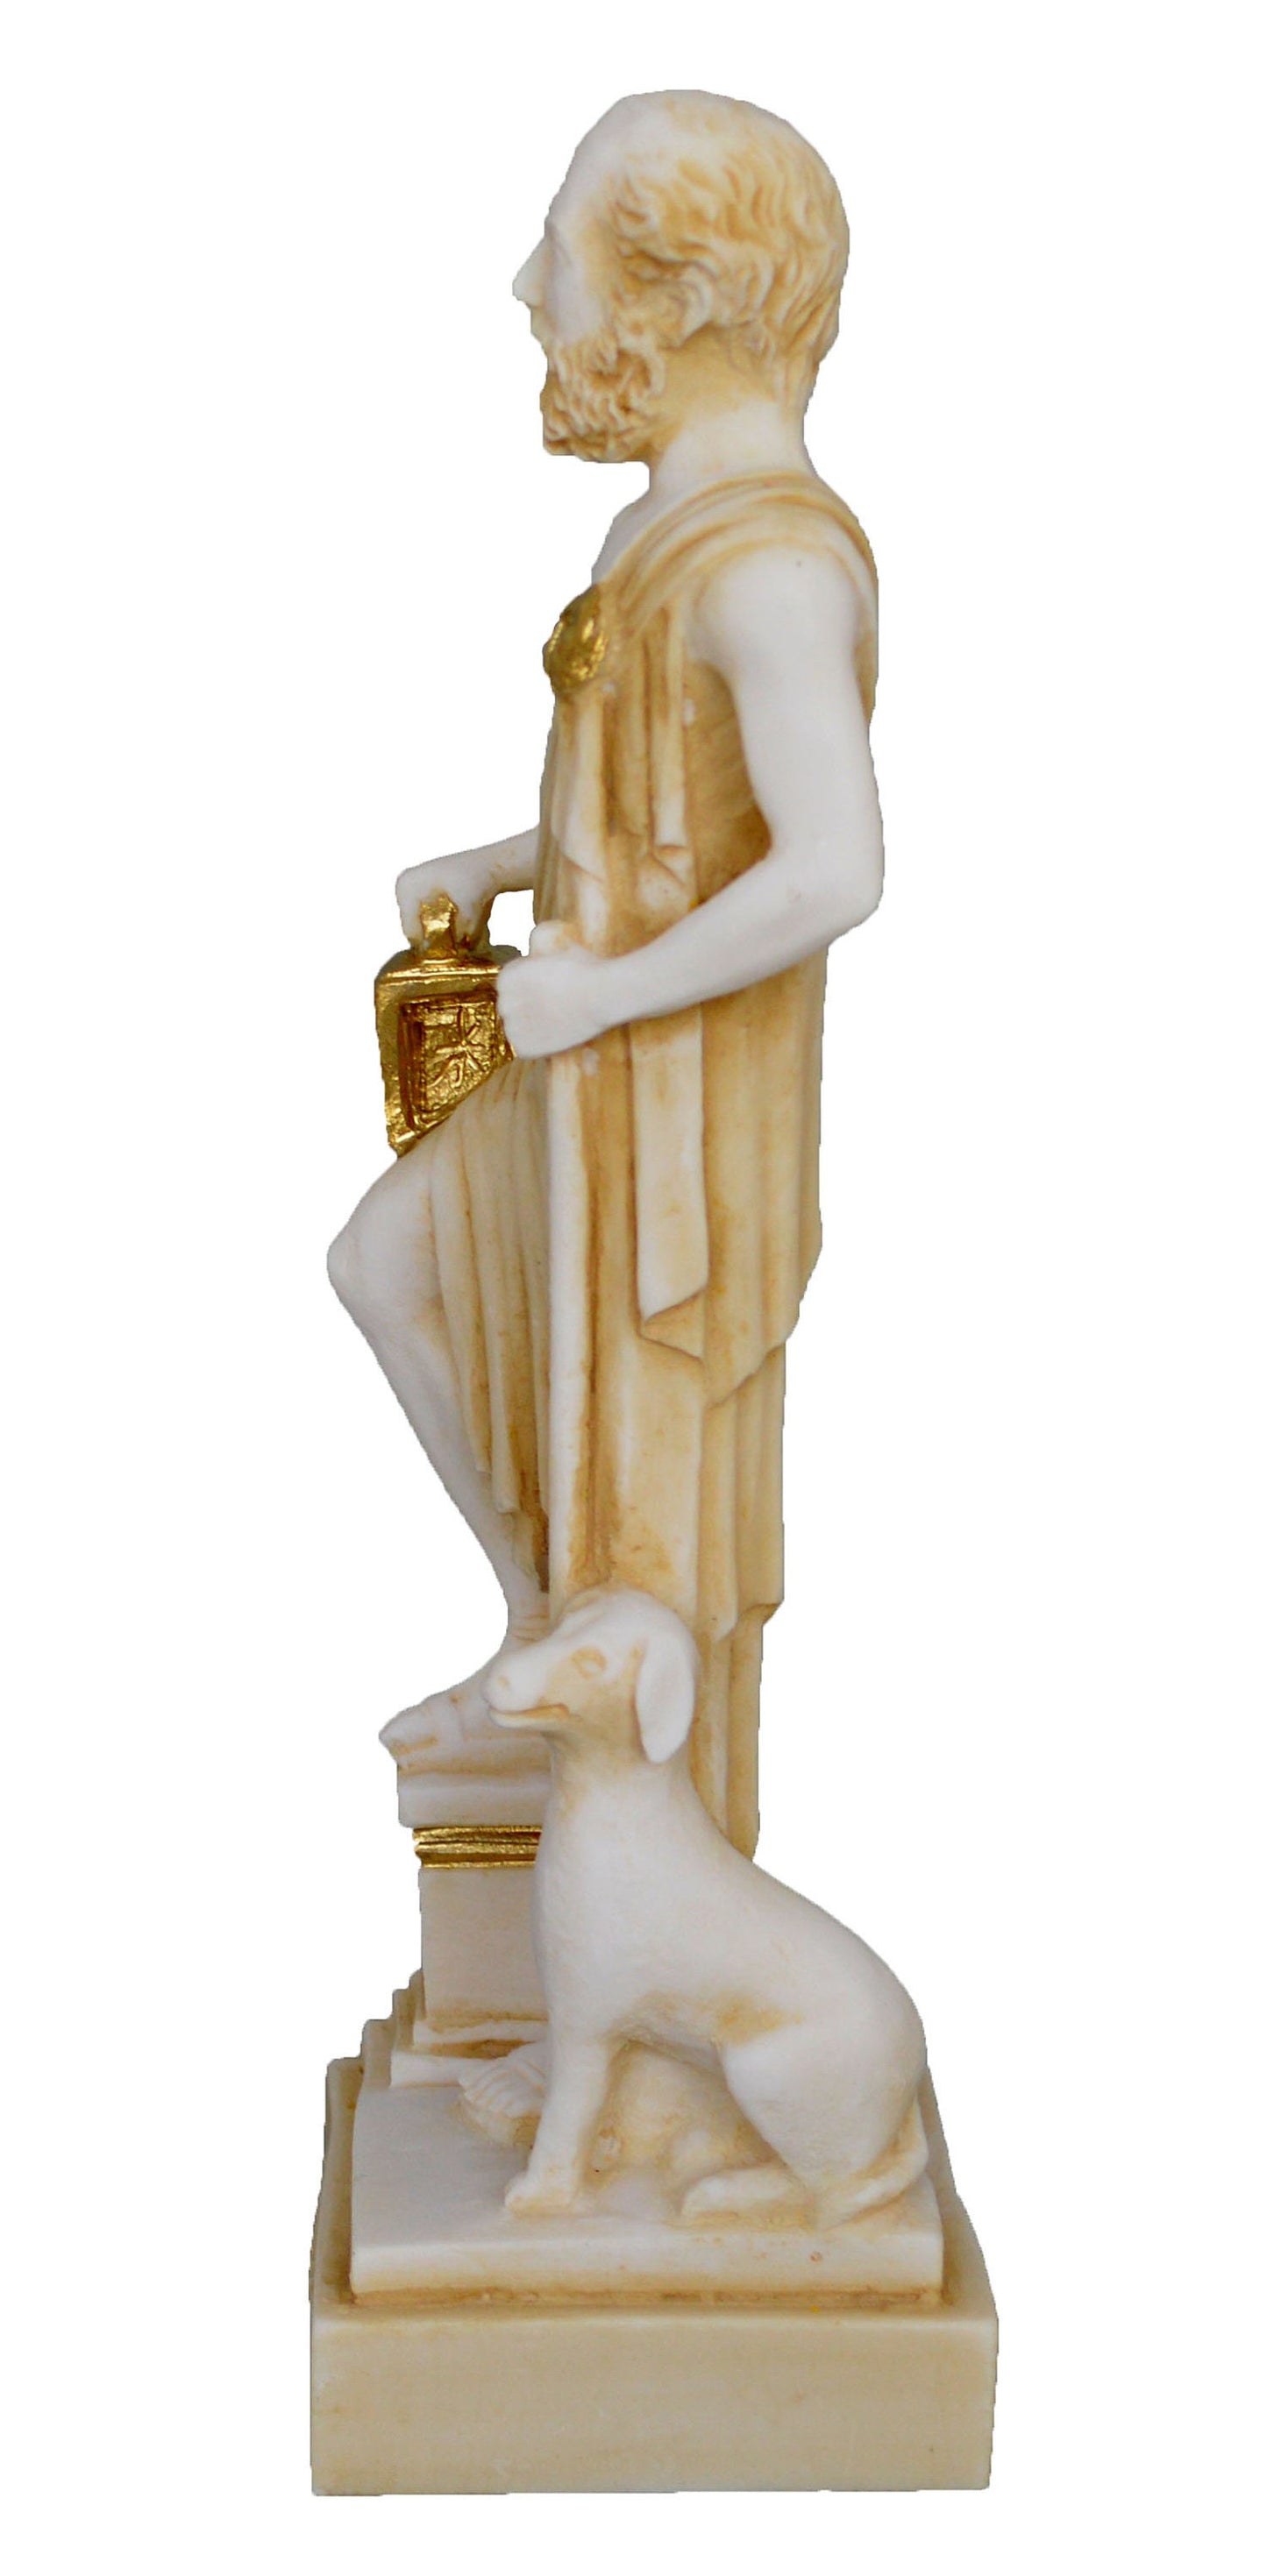 Diogenes the Cynic - Ancient Greek Philosopher - Cynicism - Student of Antisthenes - Aged Alabaster Statue Sculpture